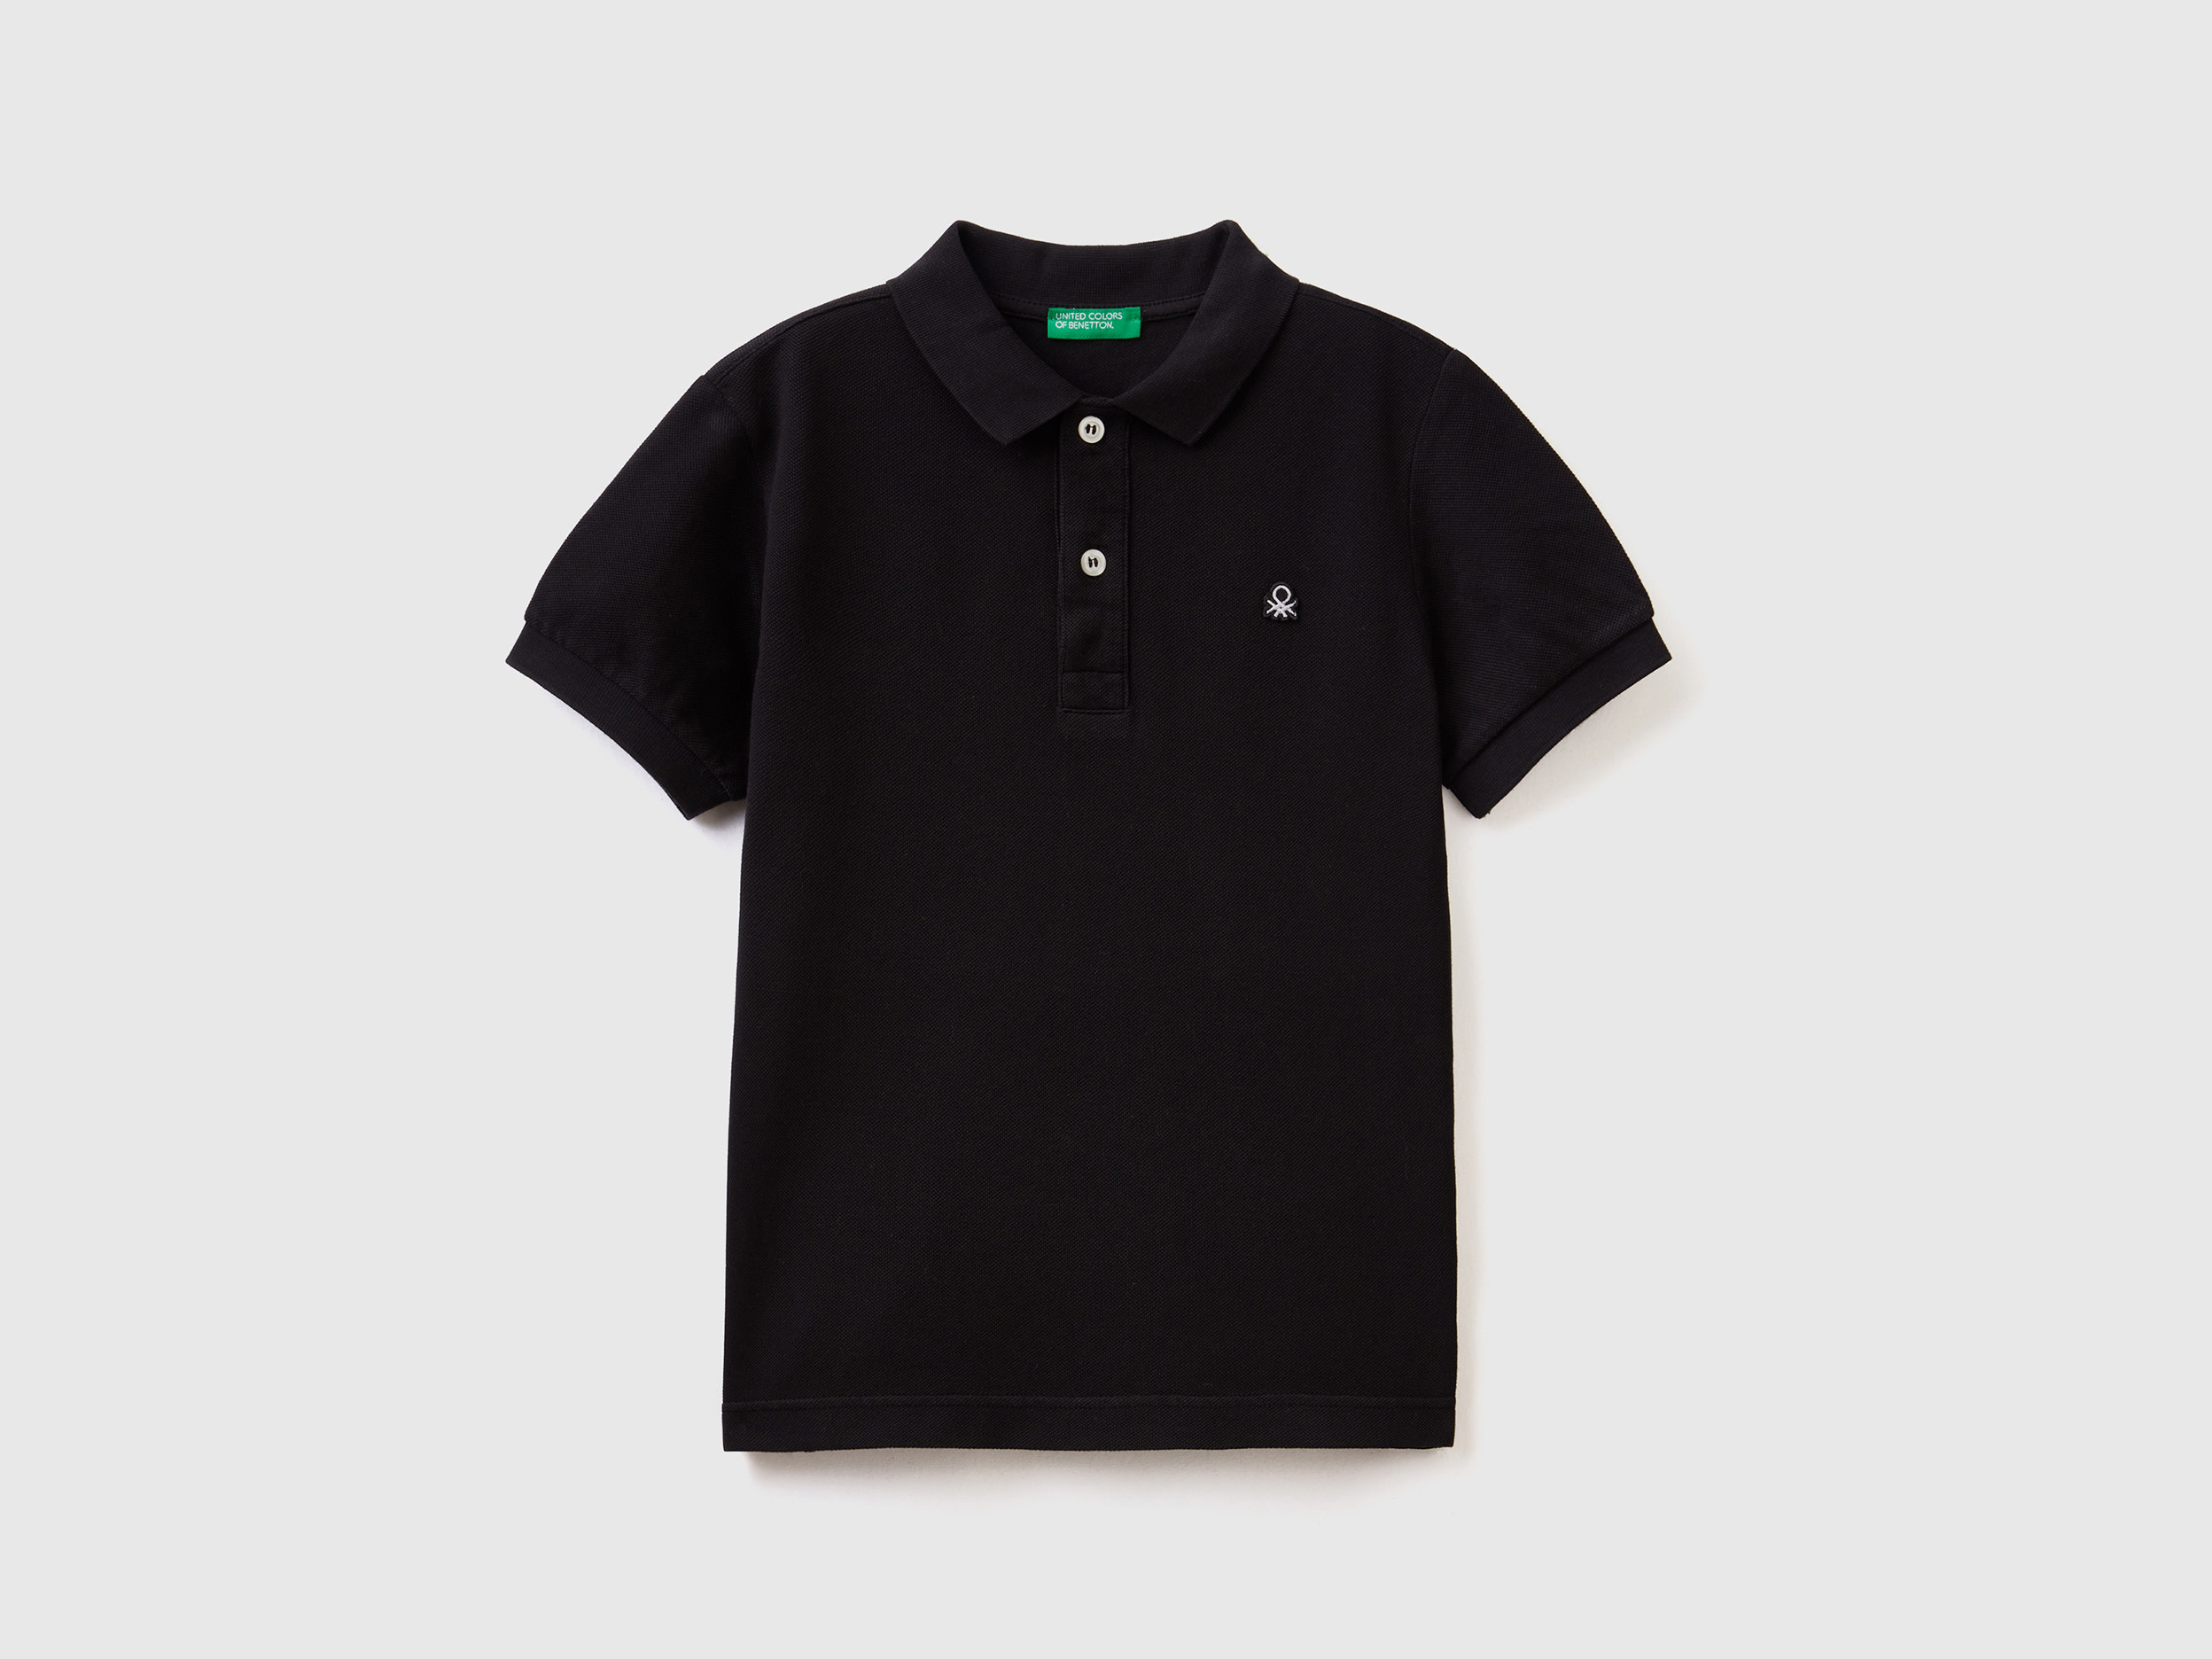 Image of Benetton, Slim Fit Polo In 100% Organic Cotton, size 2XL, Black, Kids